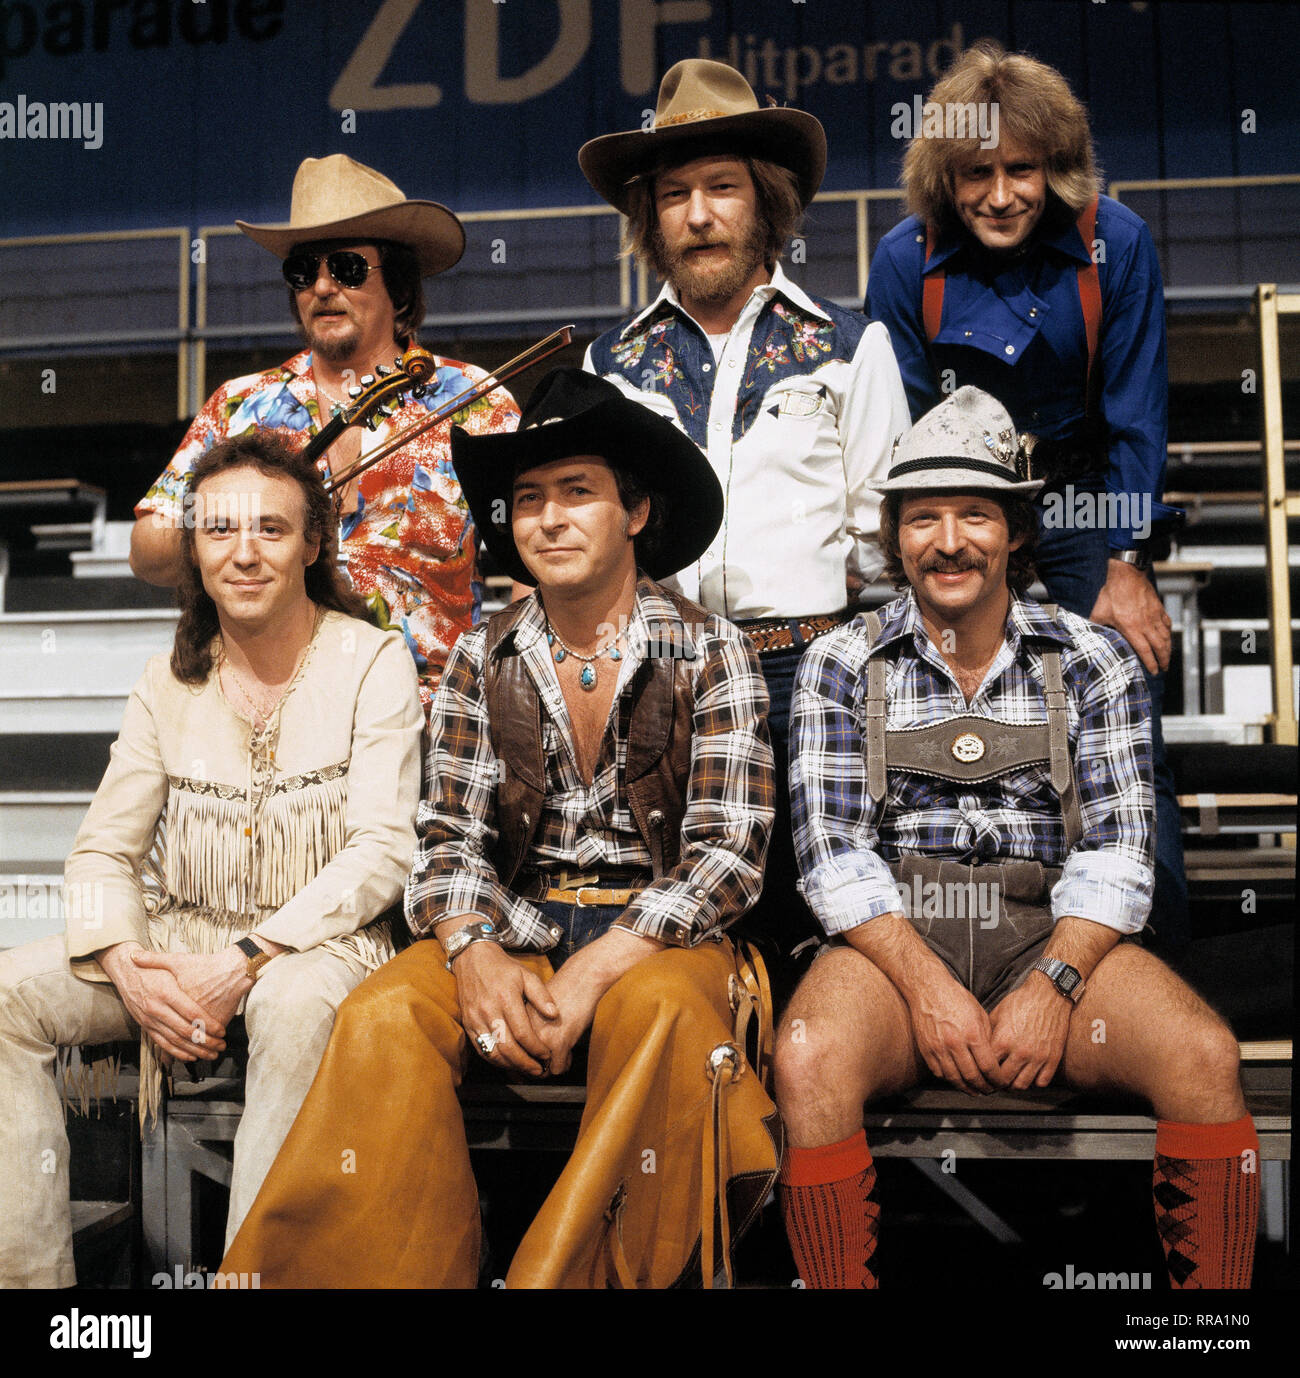 TRUCK STOP / TRUCK STOP, Musikgruppe, Country Music, 1981. / Musik, Gruppe,  Country, 80er / , Lucius B. Reichling, / Überschrift: TRUCK STOP Stock  Photo - Alamy